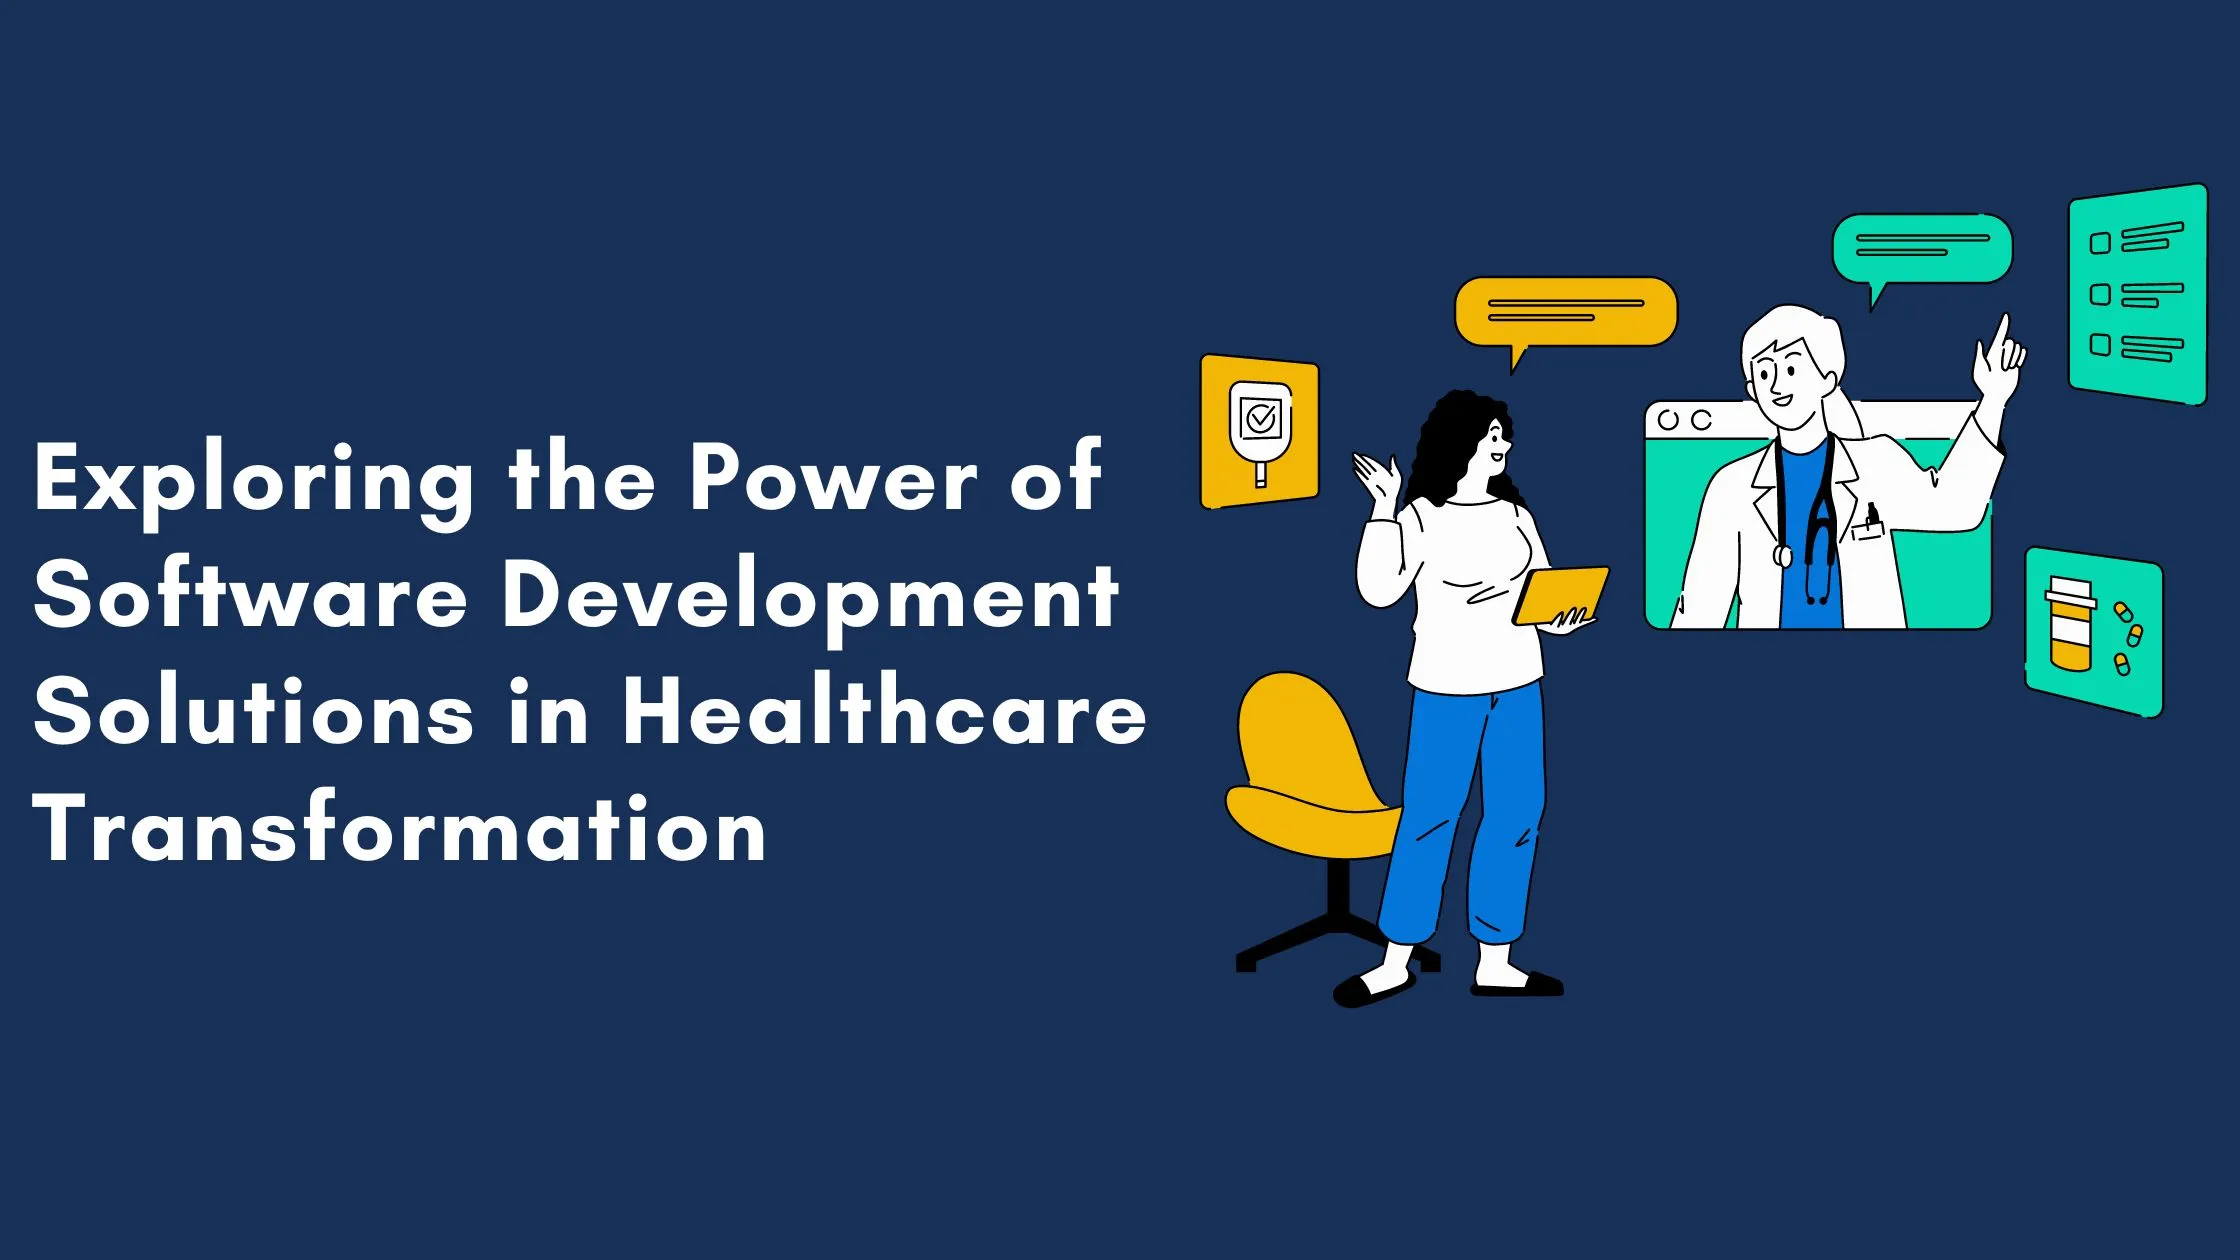 Exploring the Power of Software Development Solutions in Healthcare Transformation